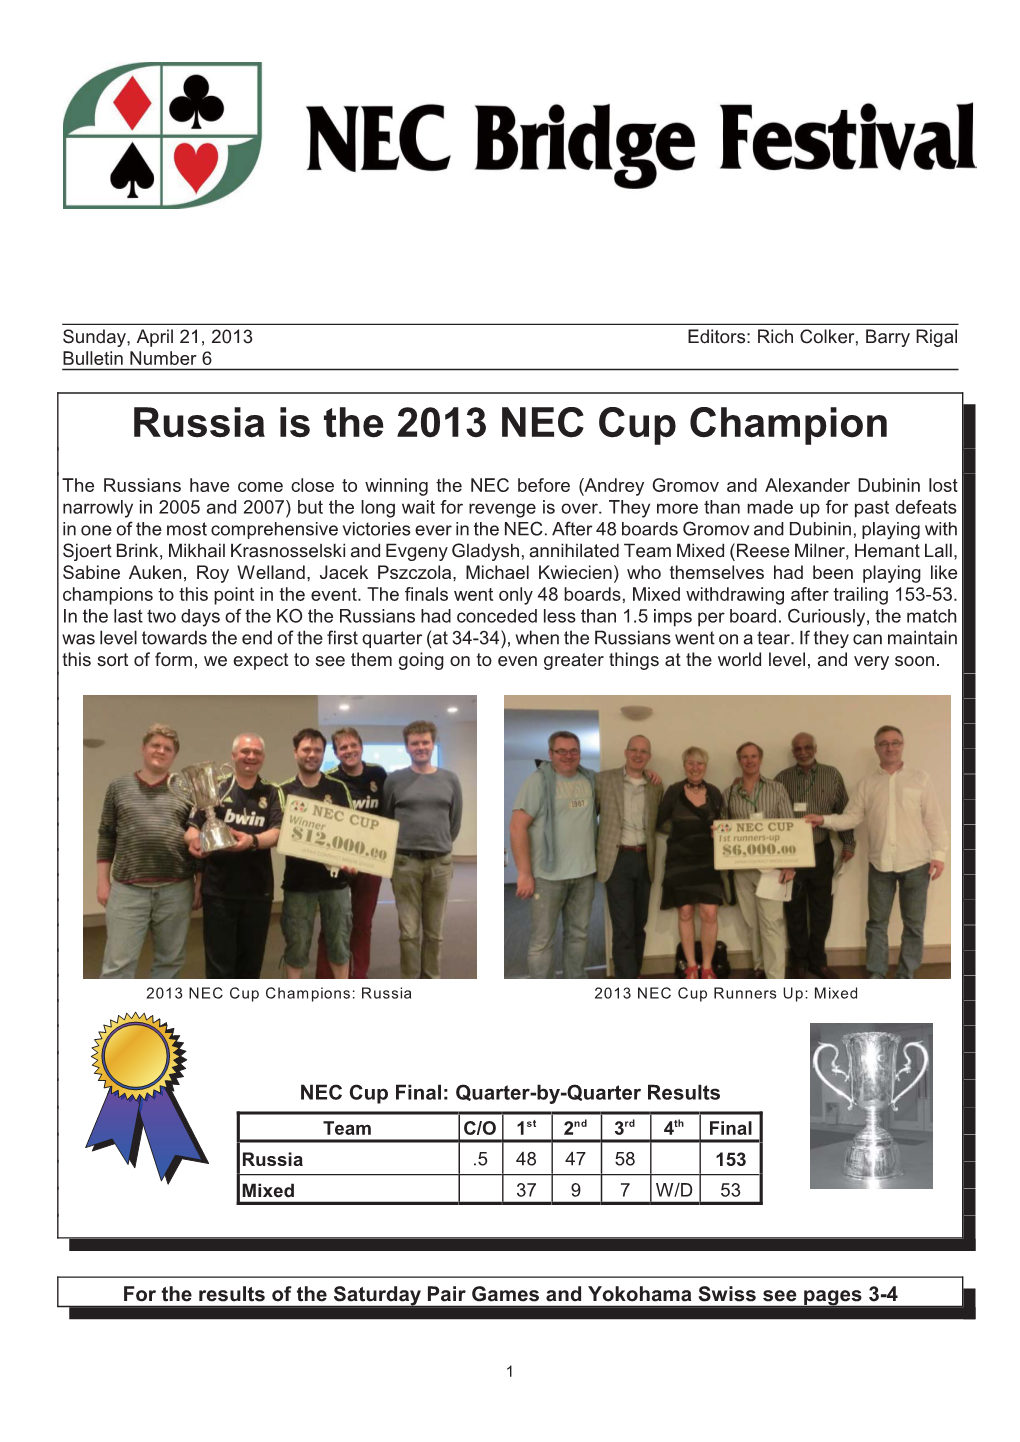 Russia Is the 2013 NEC Cup Champion